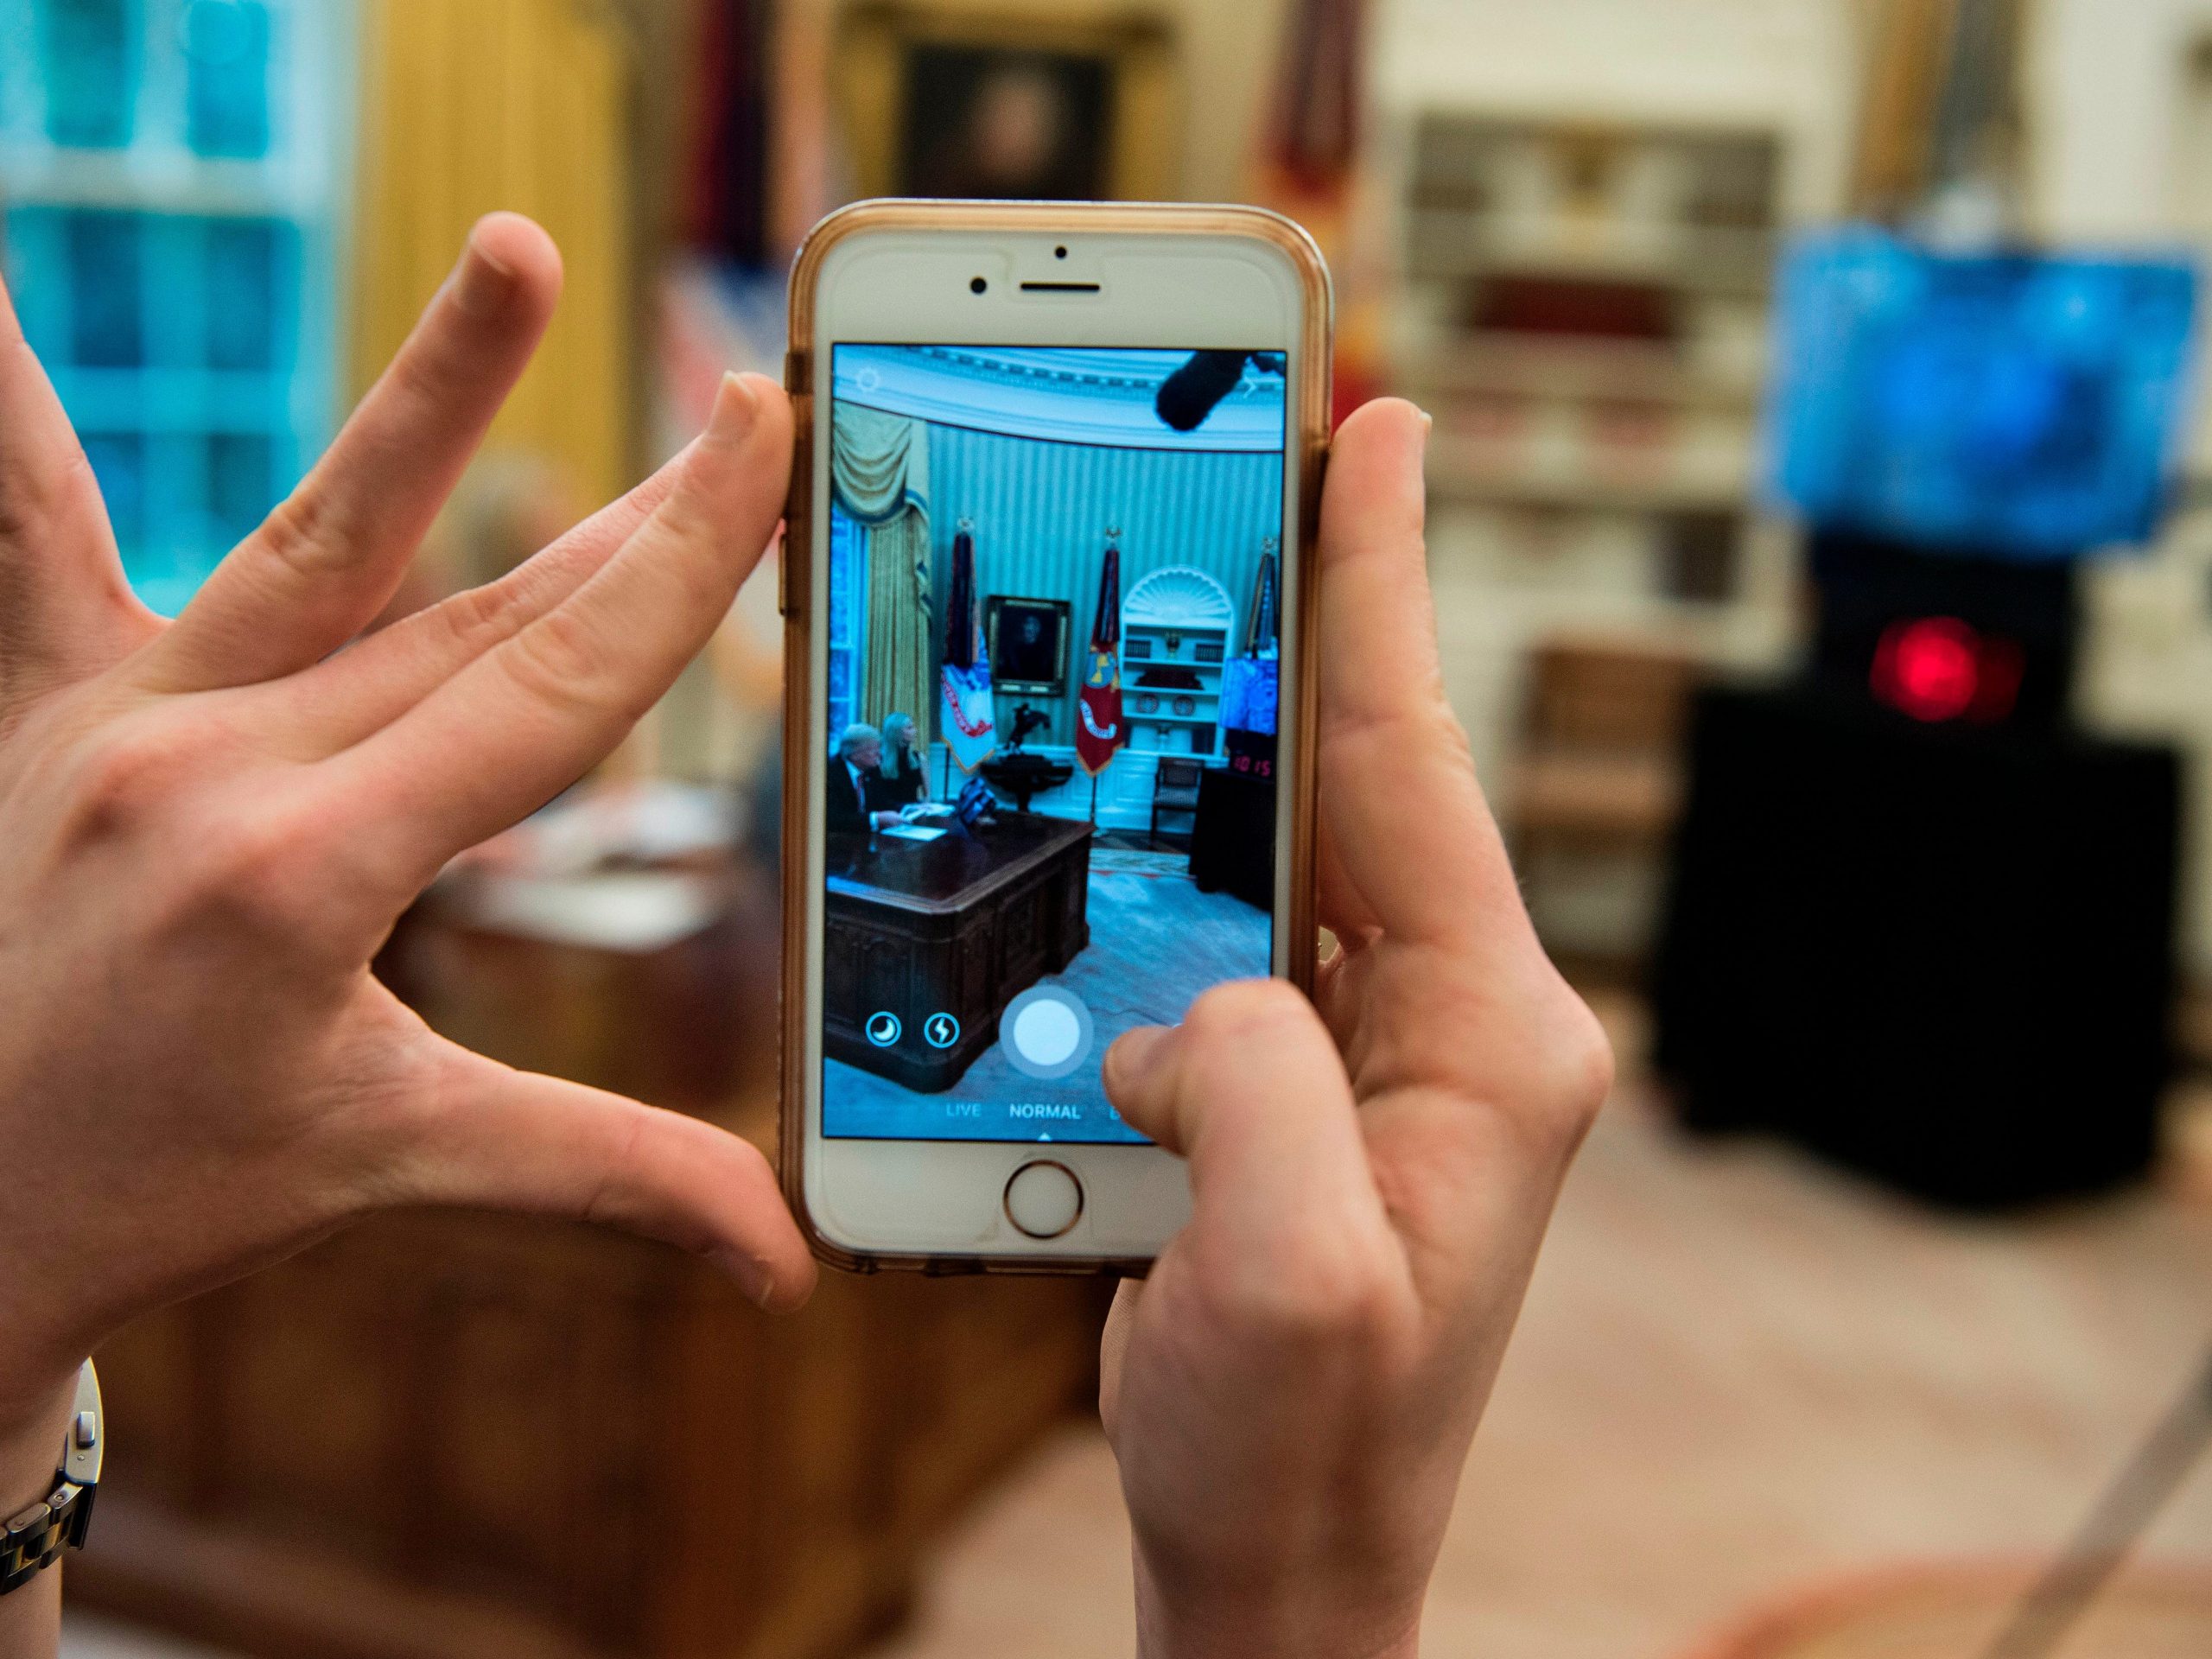 A woman uses an iPhone to take a SnapChat as former President Donald Trump speaks via video with NASA astronauts from the Oval Office of the White House on April 24, 2017.